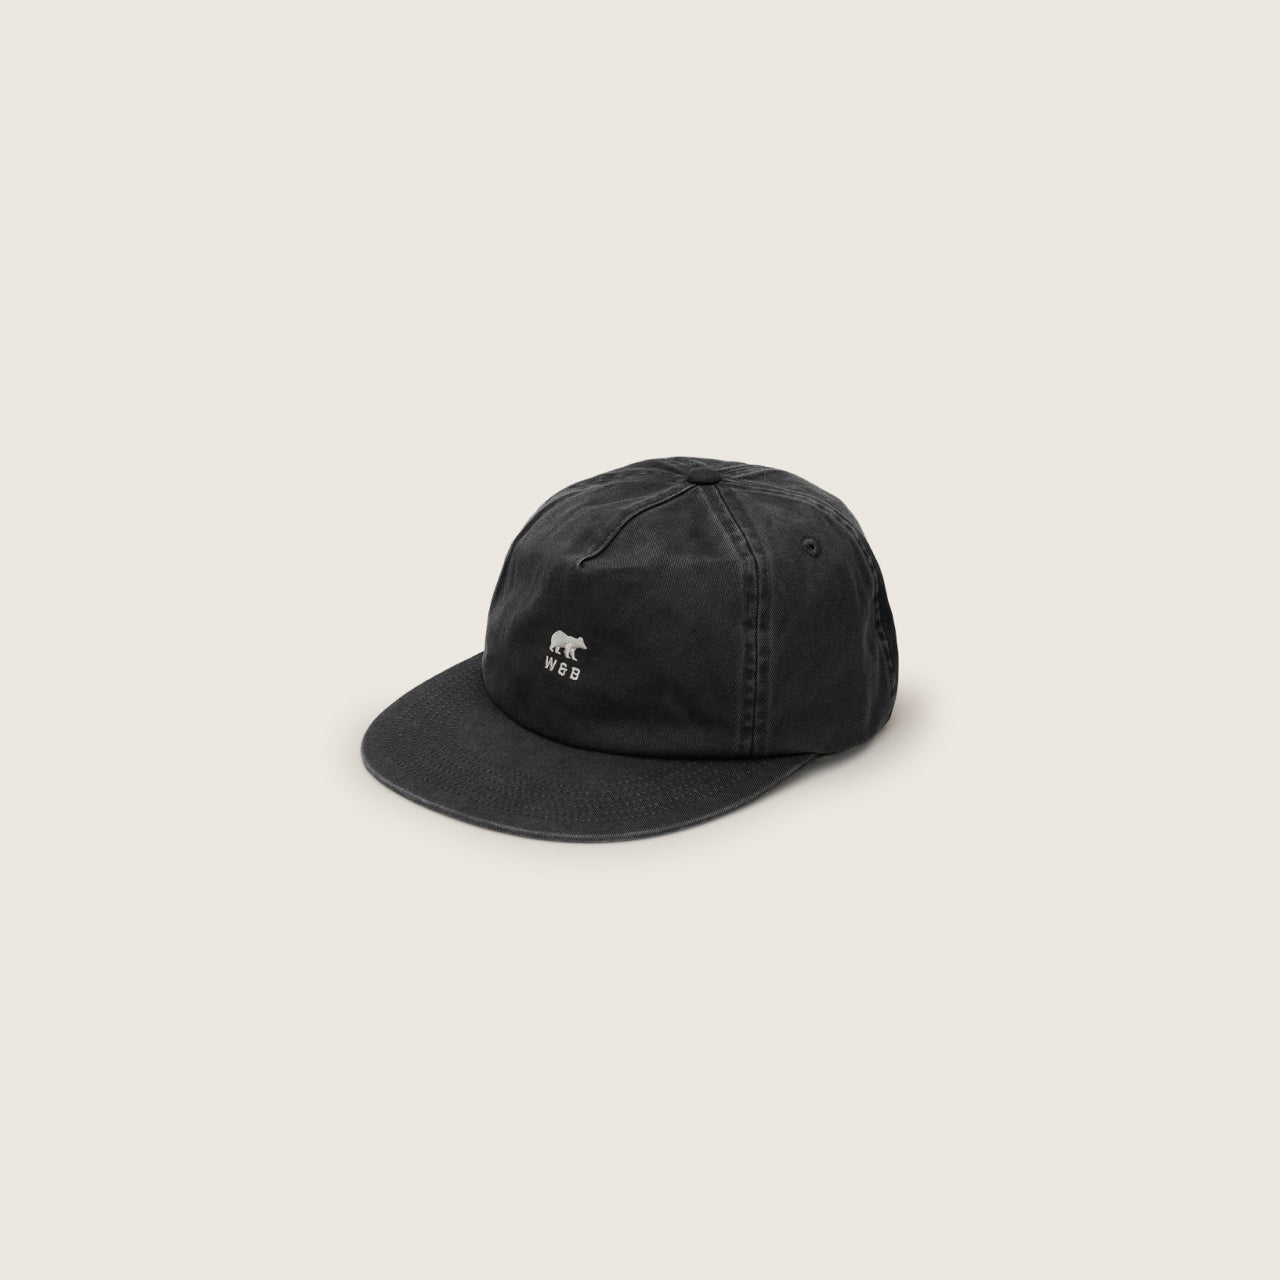 Product image of the Little Ranger Black kids hat side view